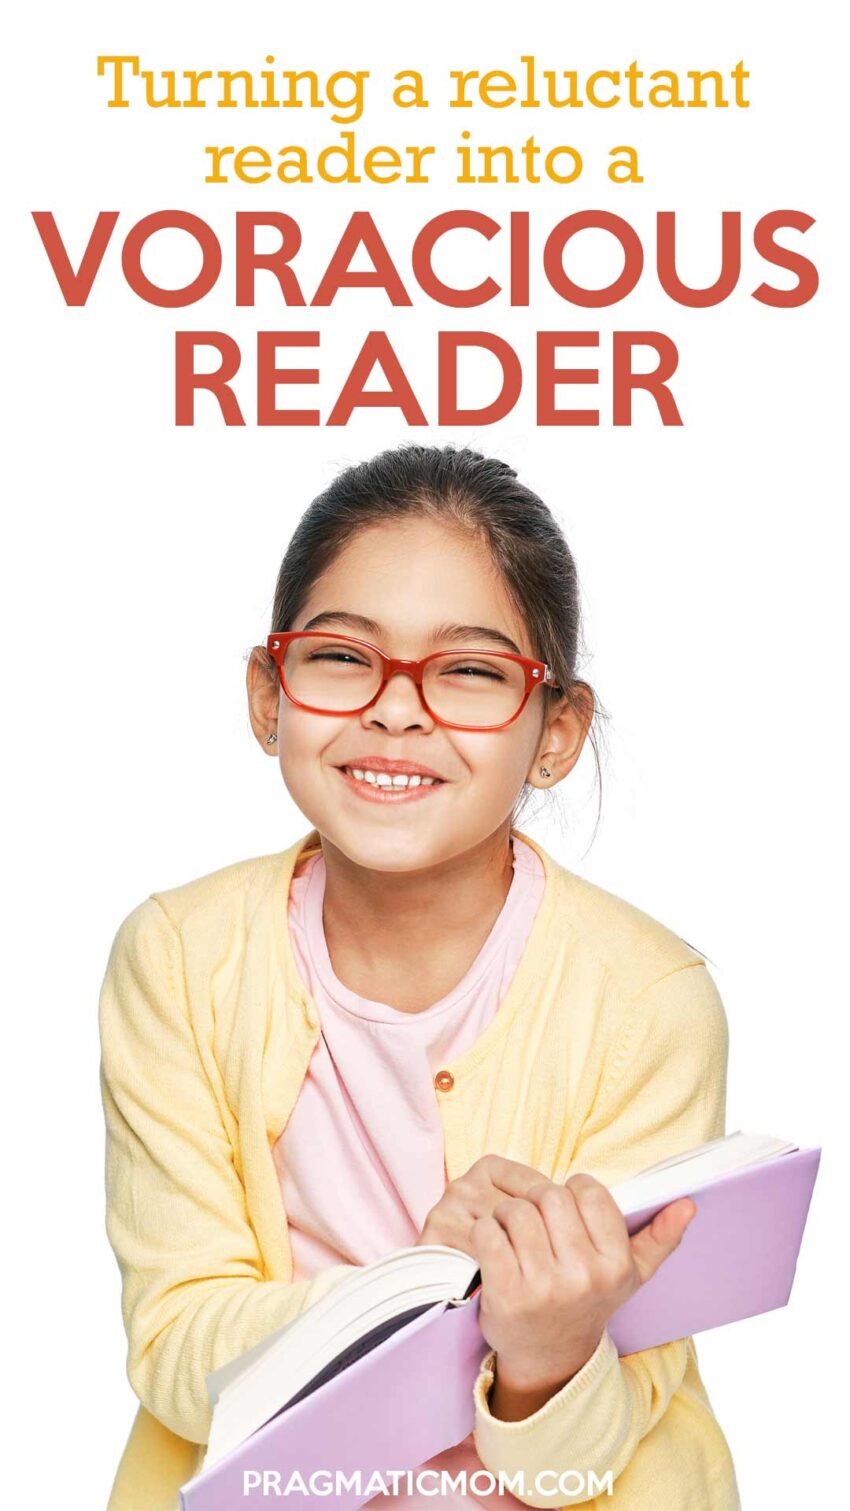 Turning a Reluctant Reader into a Voracious Reader